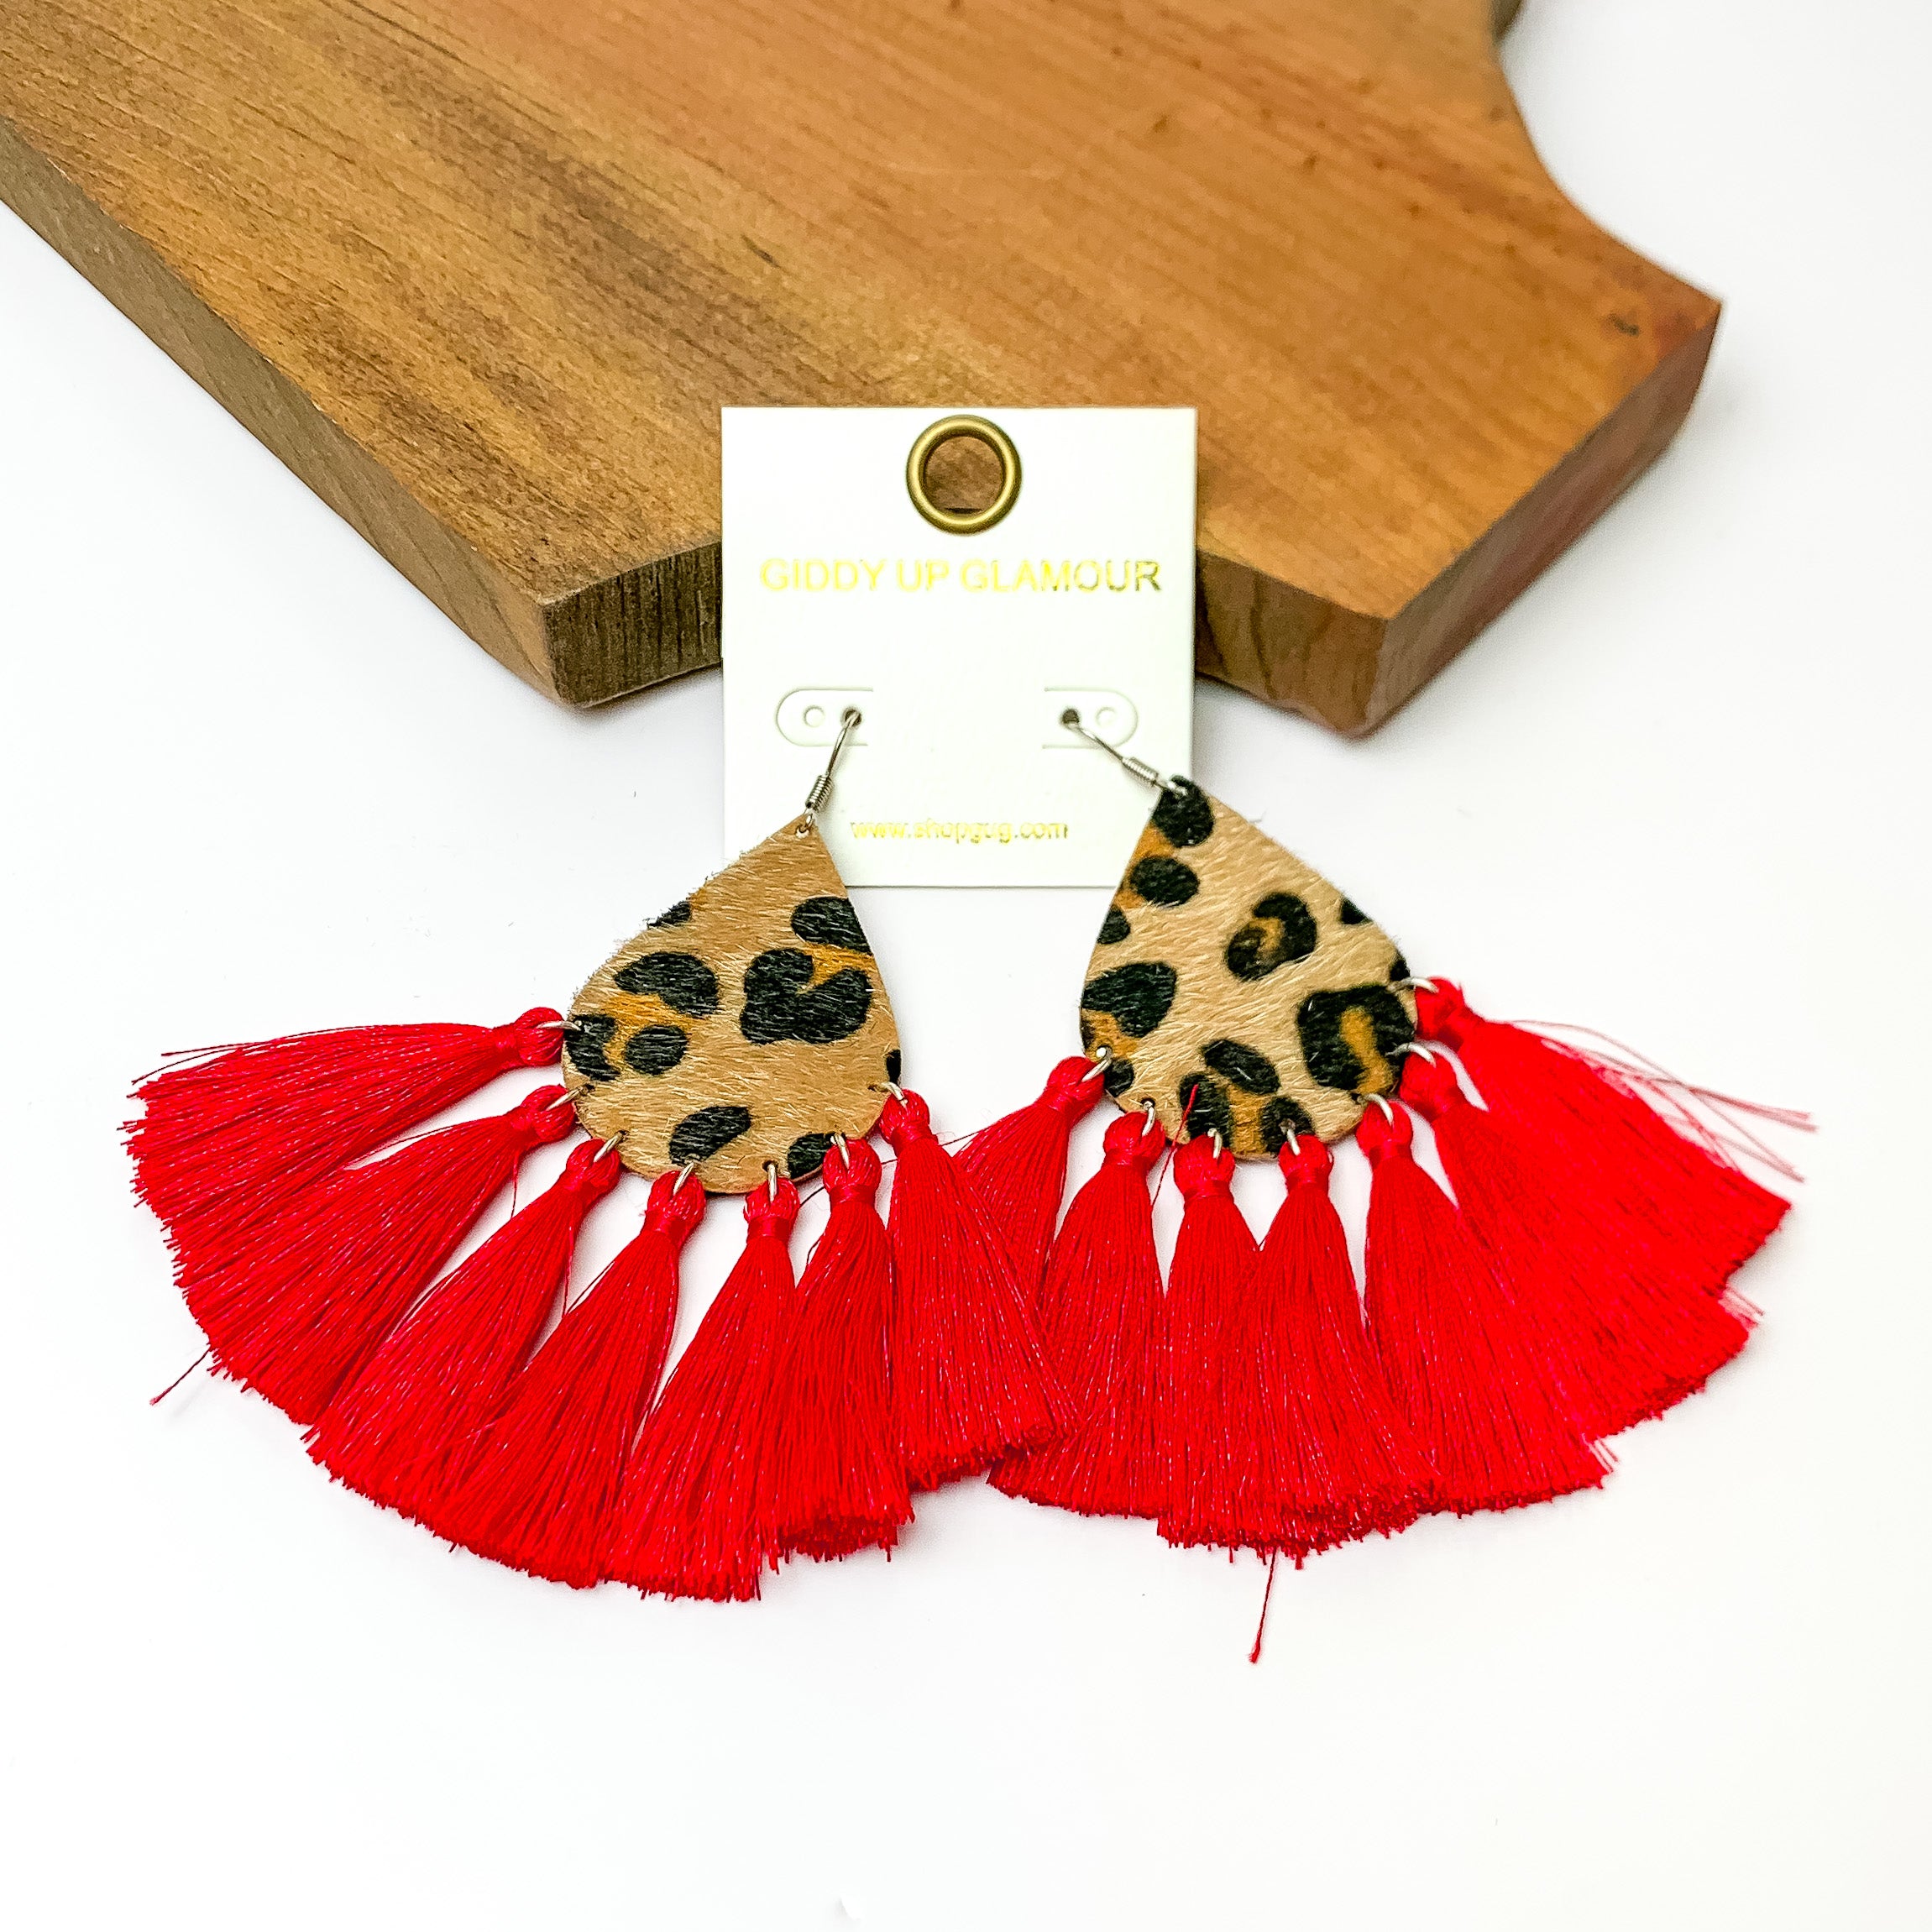 Leopard teardrop earrings with tassels trim in red. Pictured on a white background with a wood piece at the top.